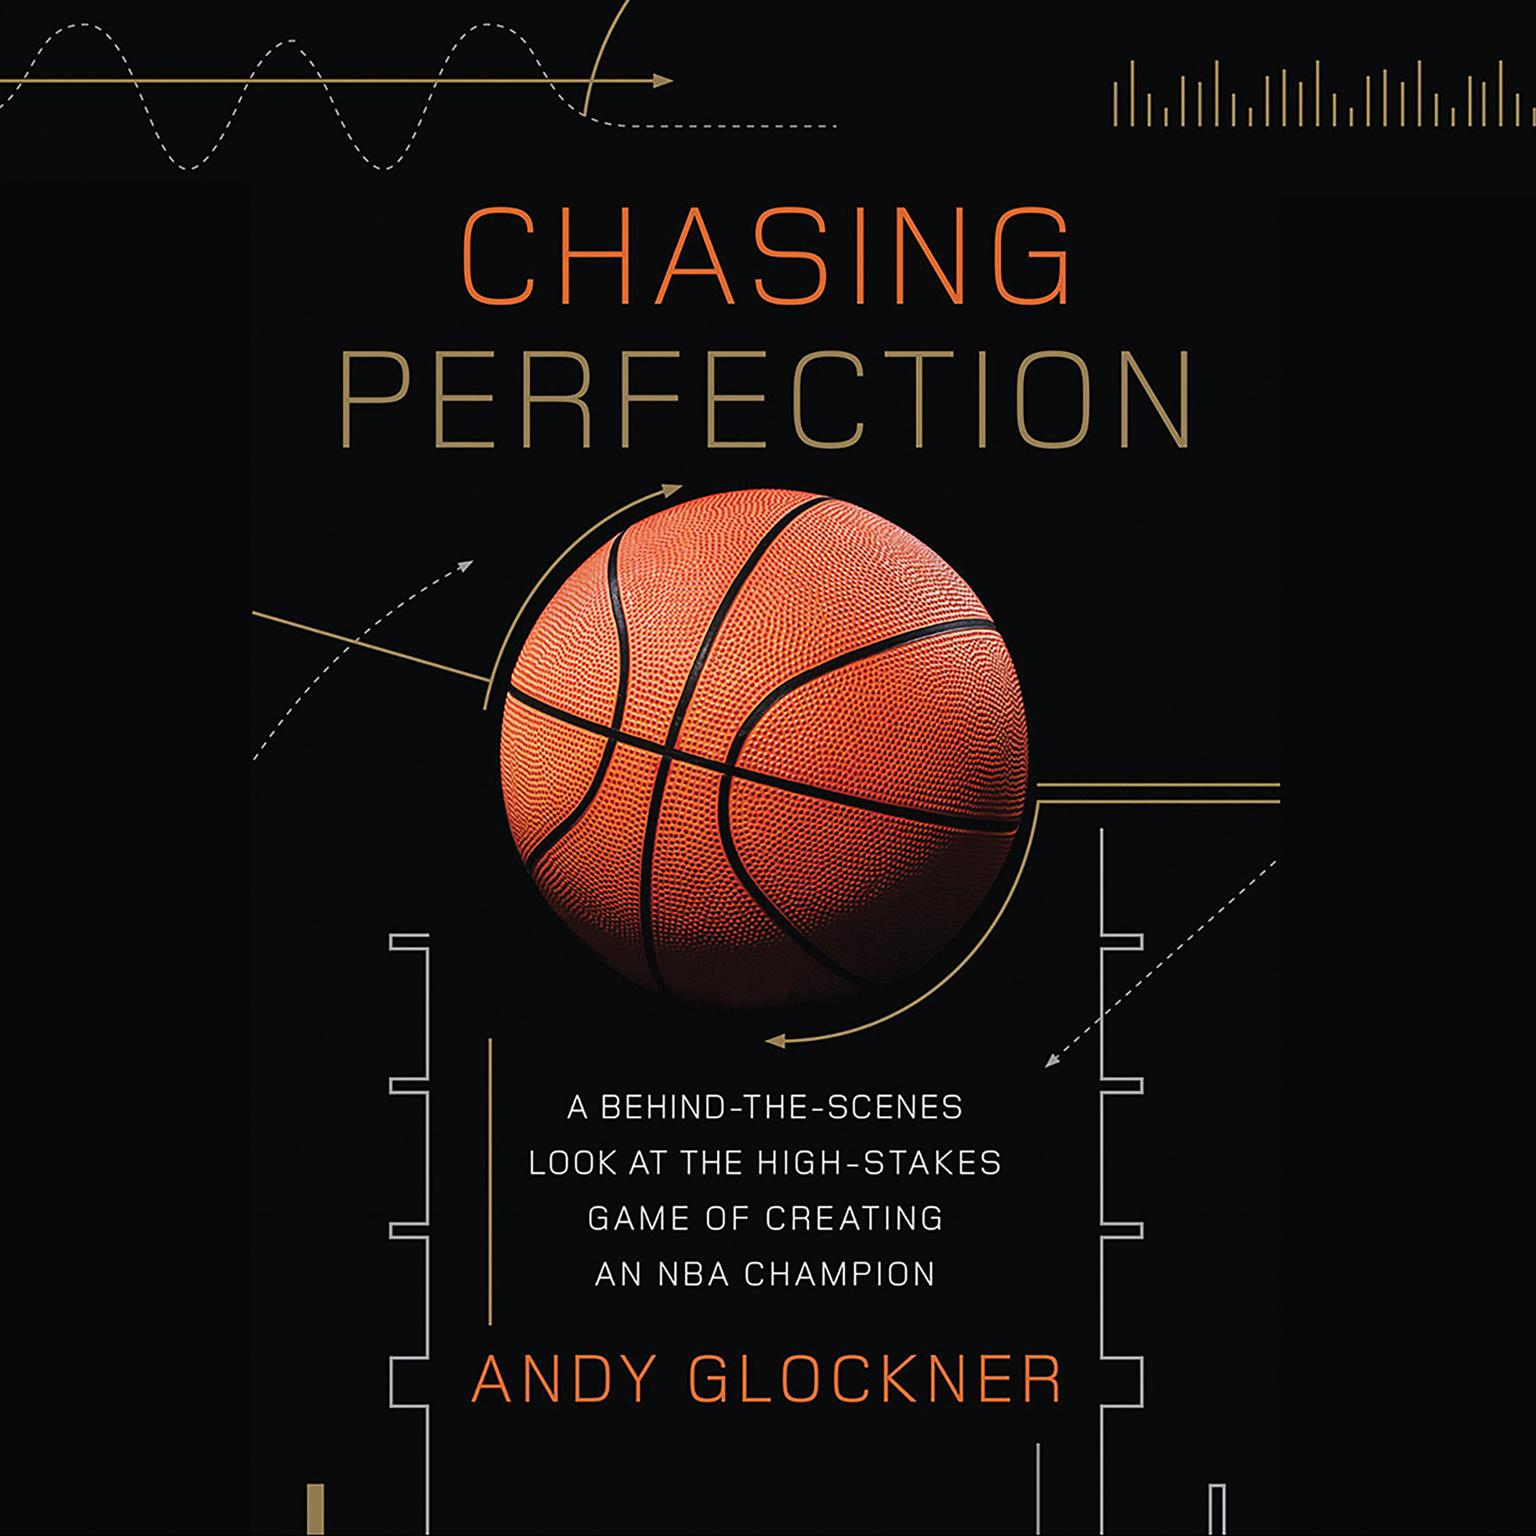 Chasing Perfection: A Behind-the-Scenes Look at the High-Stakes Game of Creating an NBA Champion Audiobook, by Andy Glockner